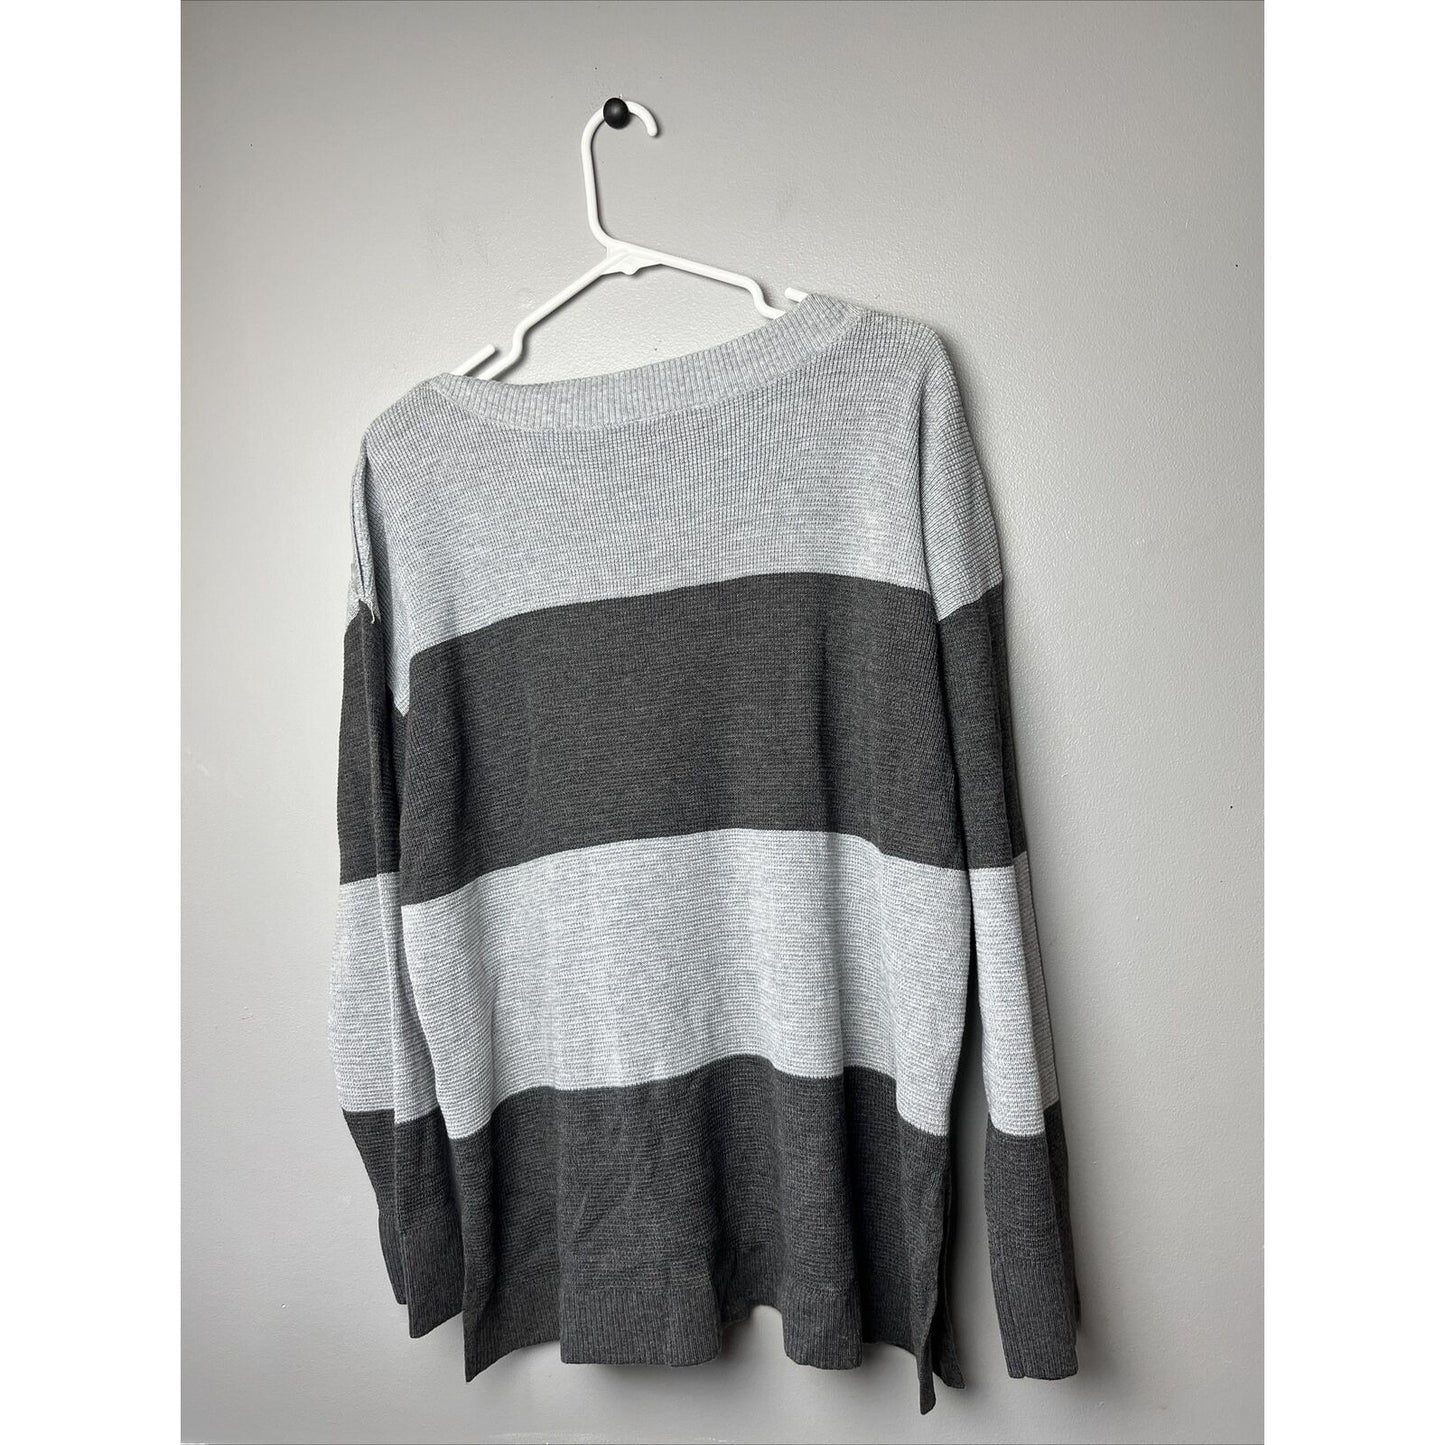 Vince Camuto Women's Button Shoulder Stripe Sweater, Gray, Size XL, $79, NWT